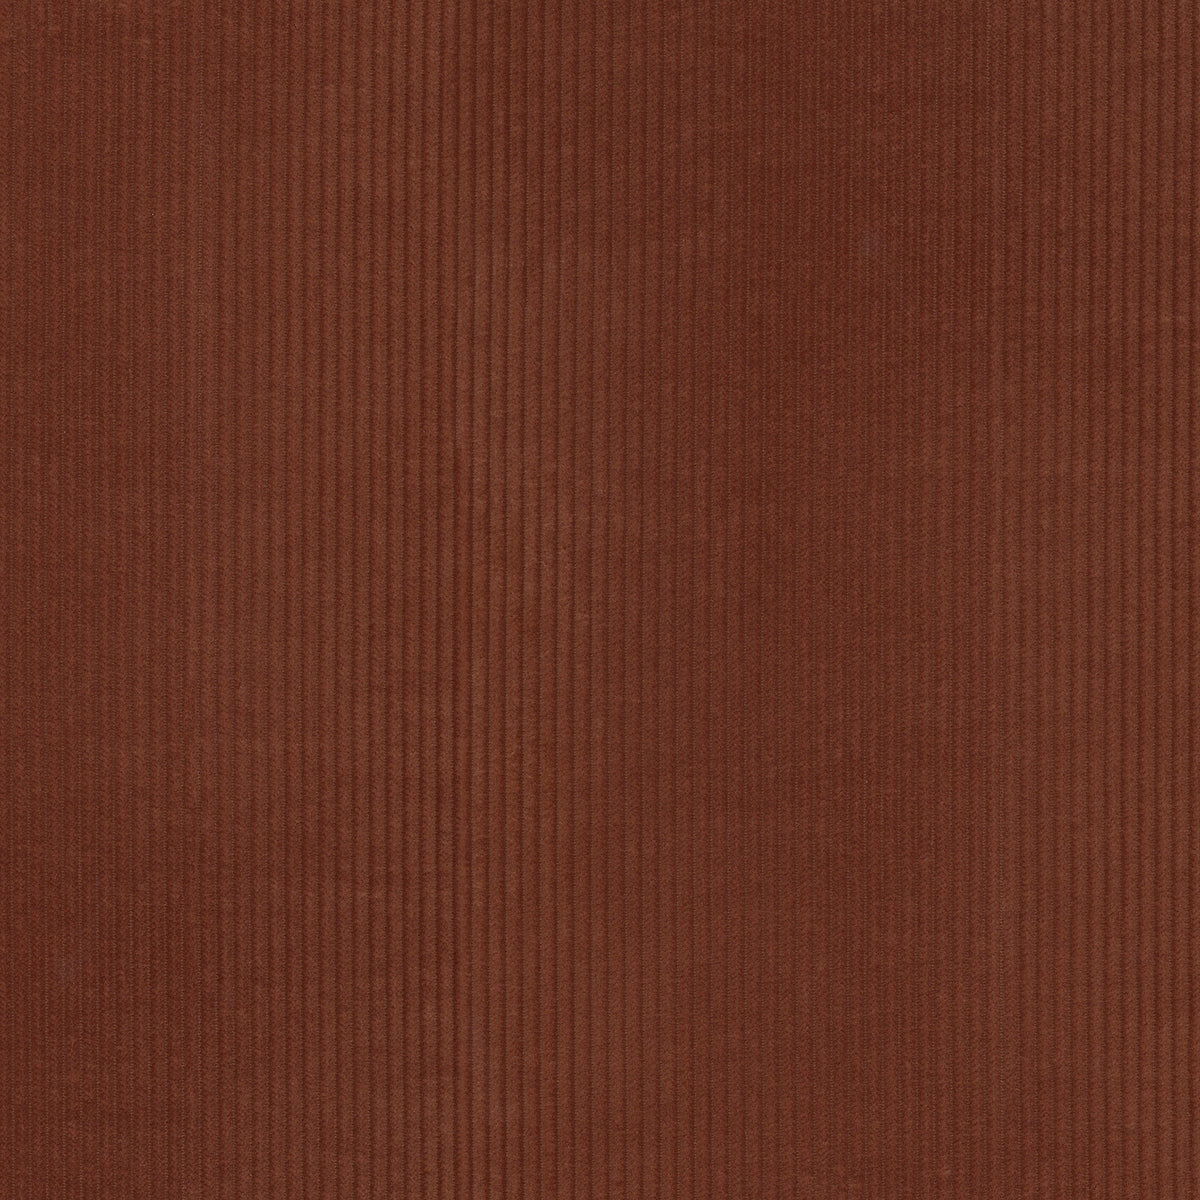 P/K Lifestyles Wales - Currant 412036 Fabric Swatch